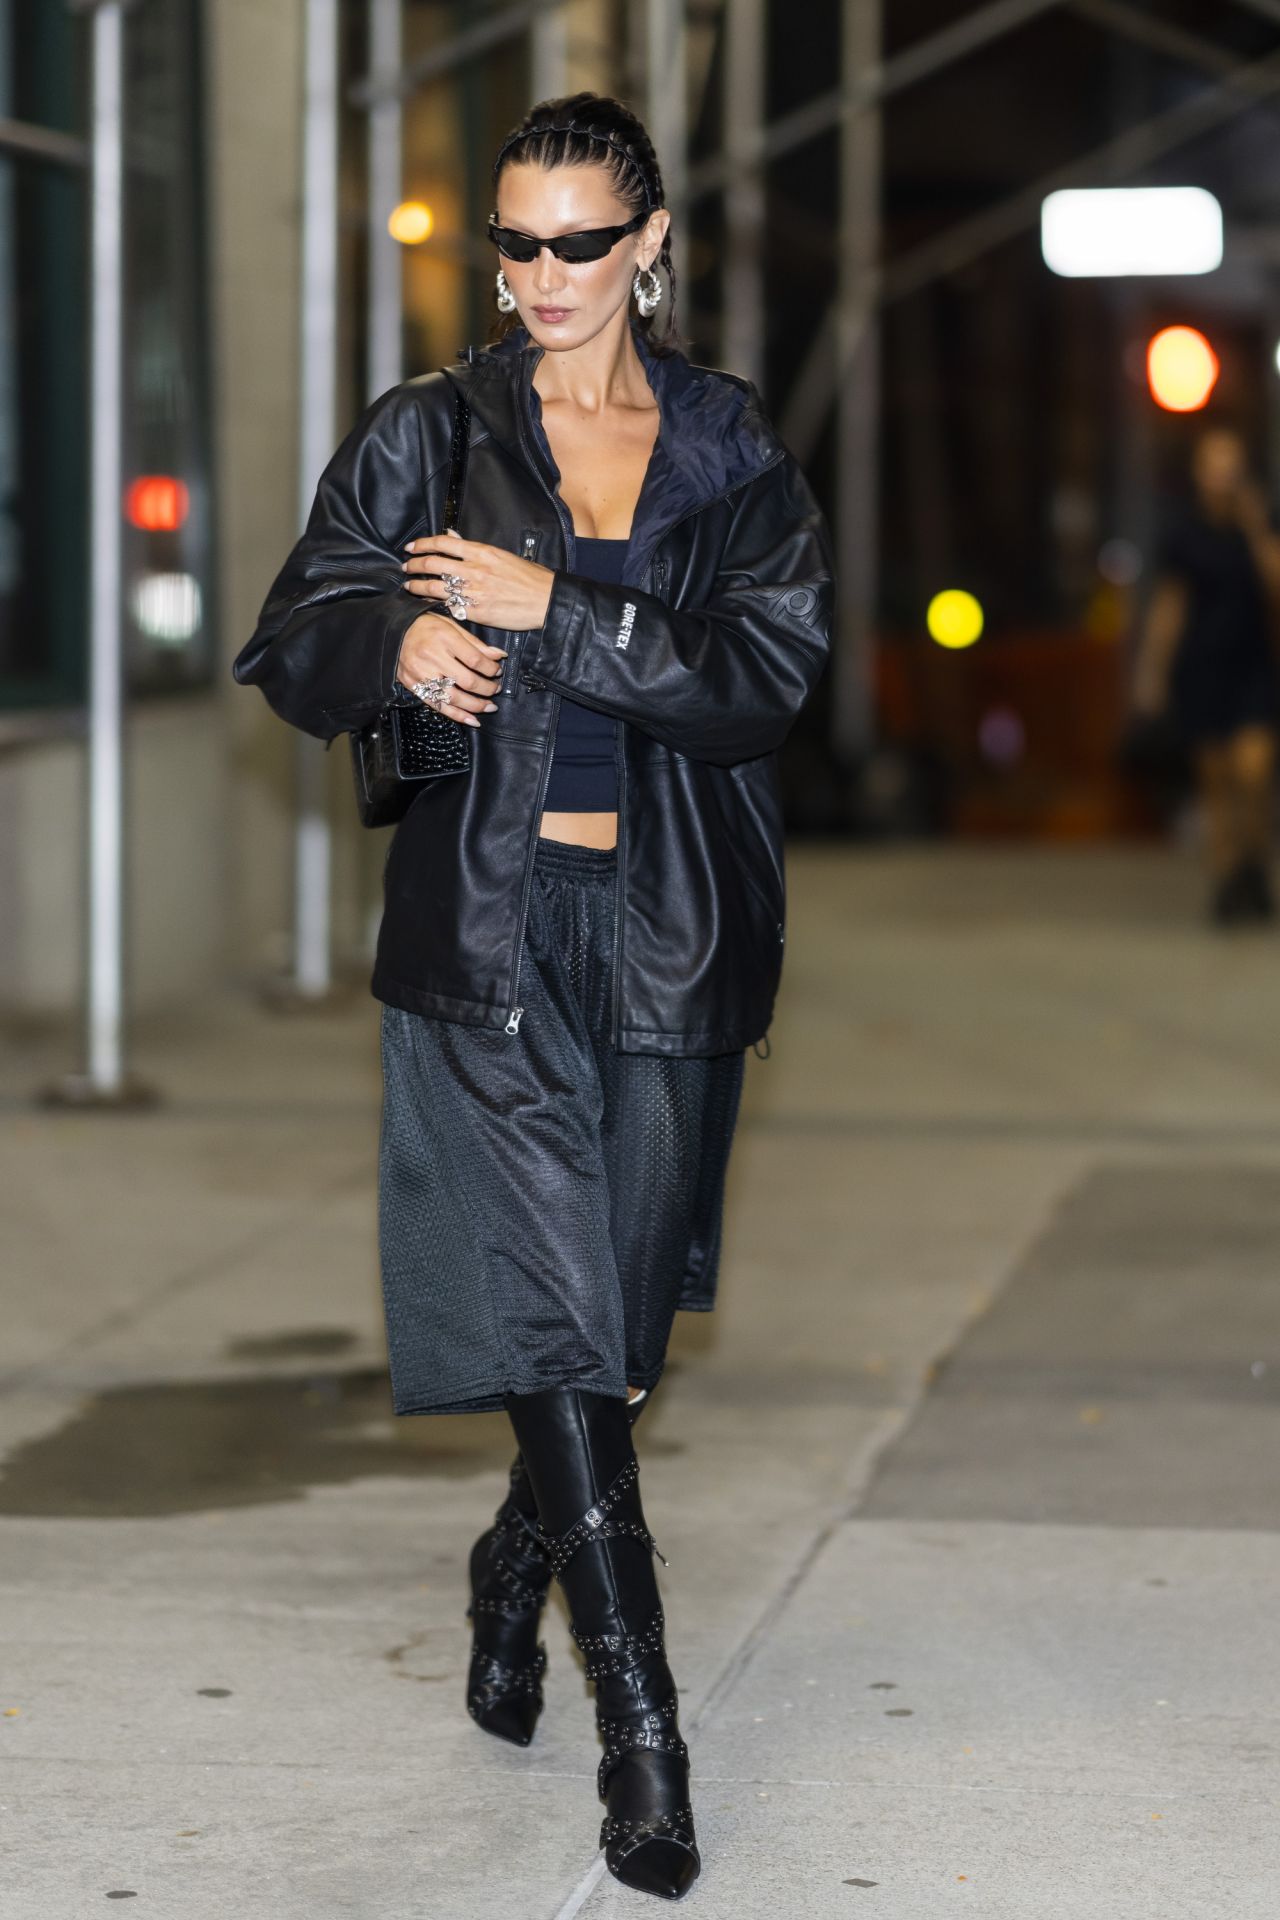 Bella Hadid in NYC June 19, 2022 – Star Style